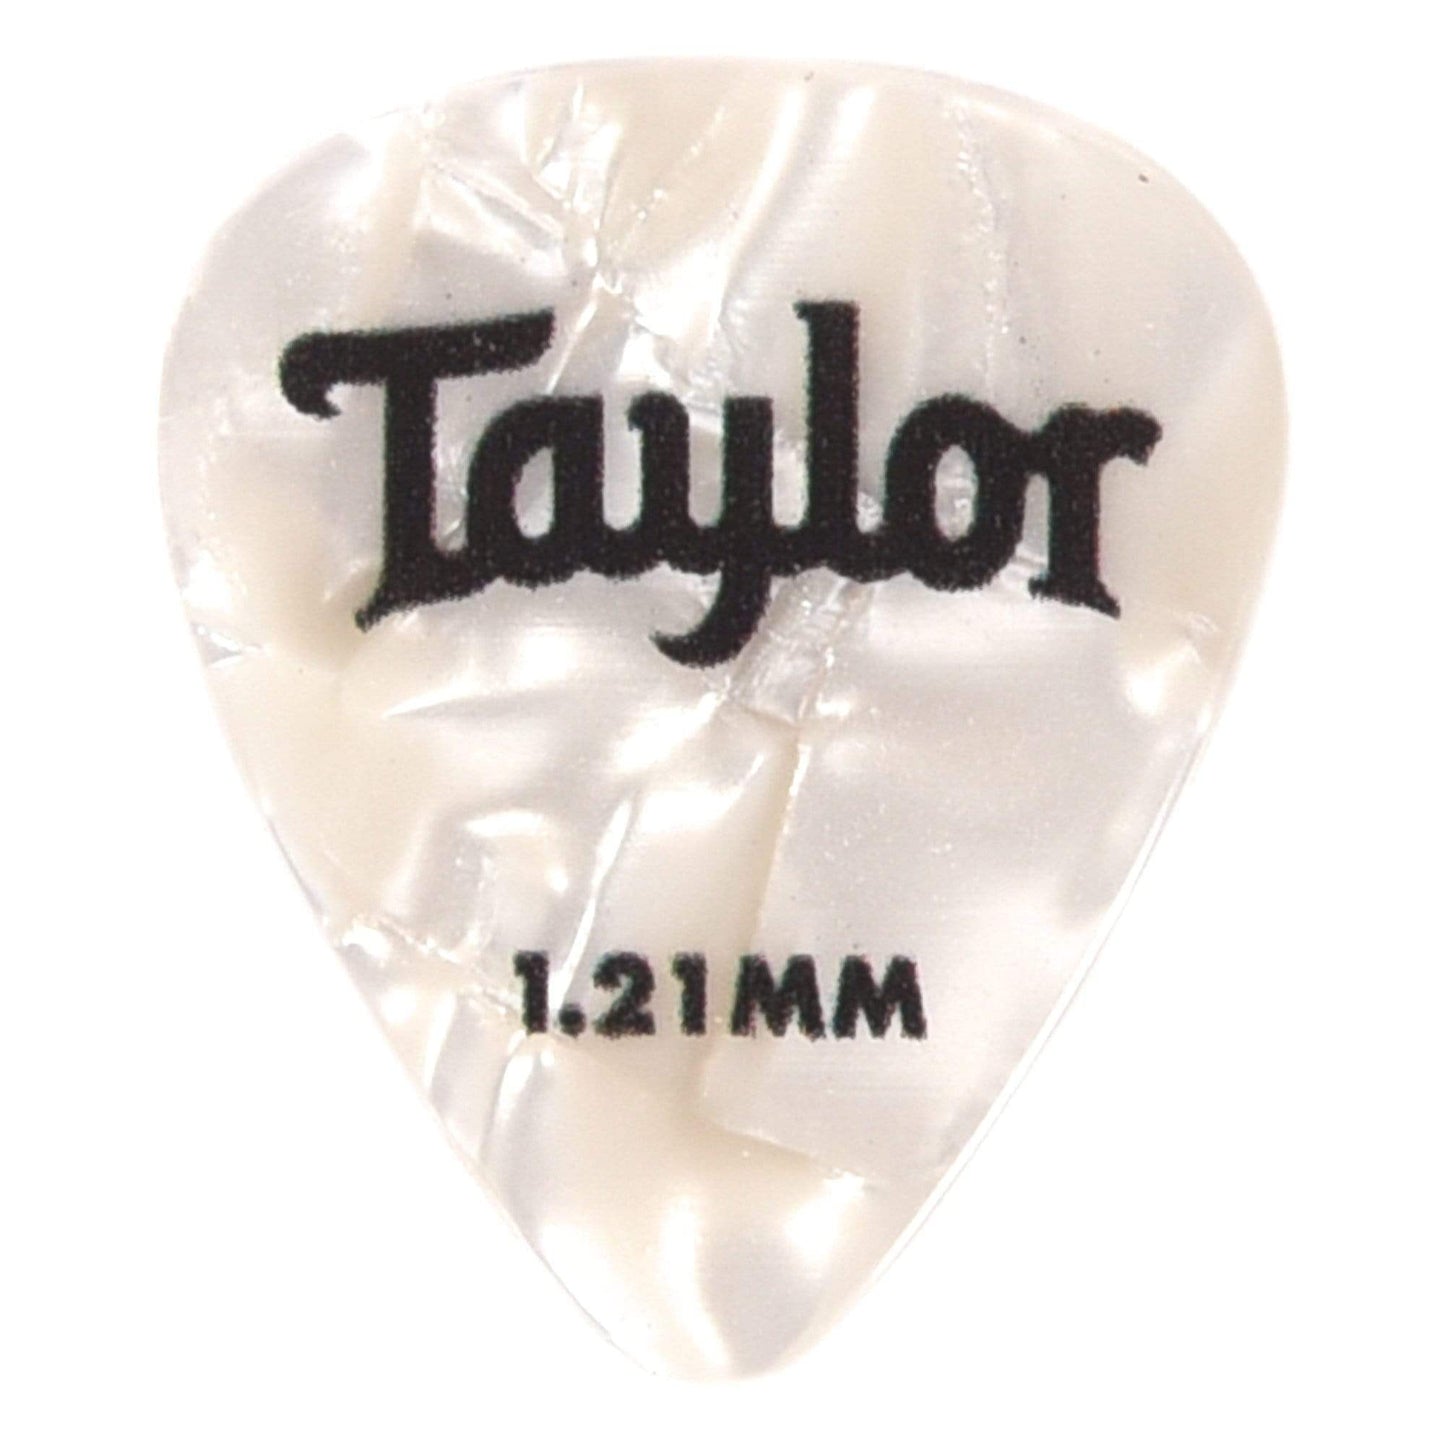 Taylor Celluloid 351 Picks White Pearl 1.21mm 4 Pack (48) Bundle Accessories / Picks